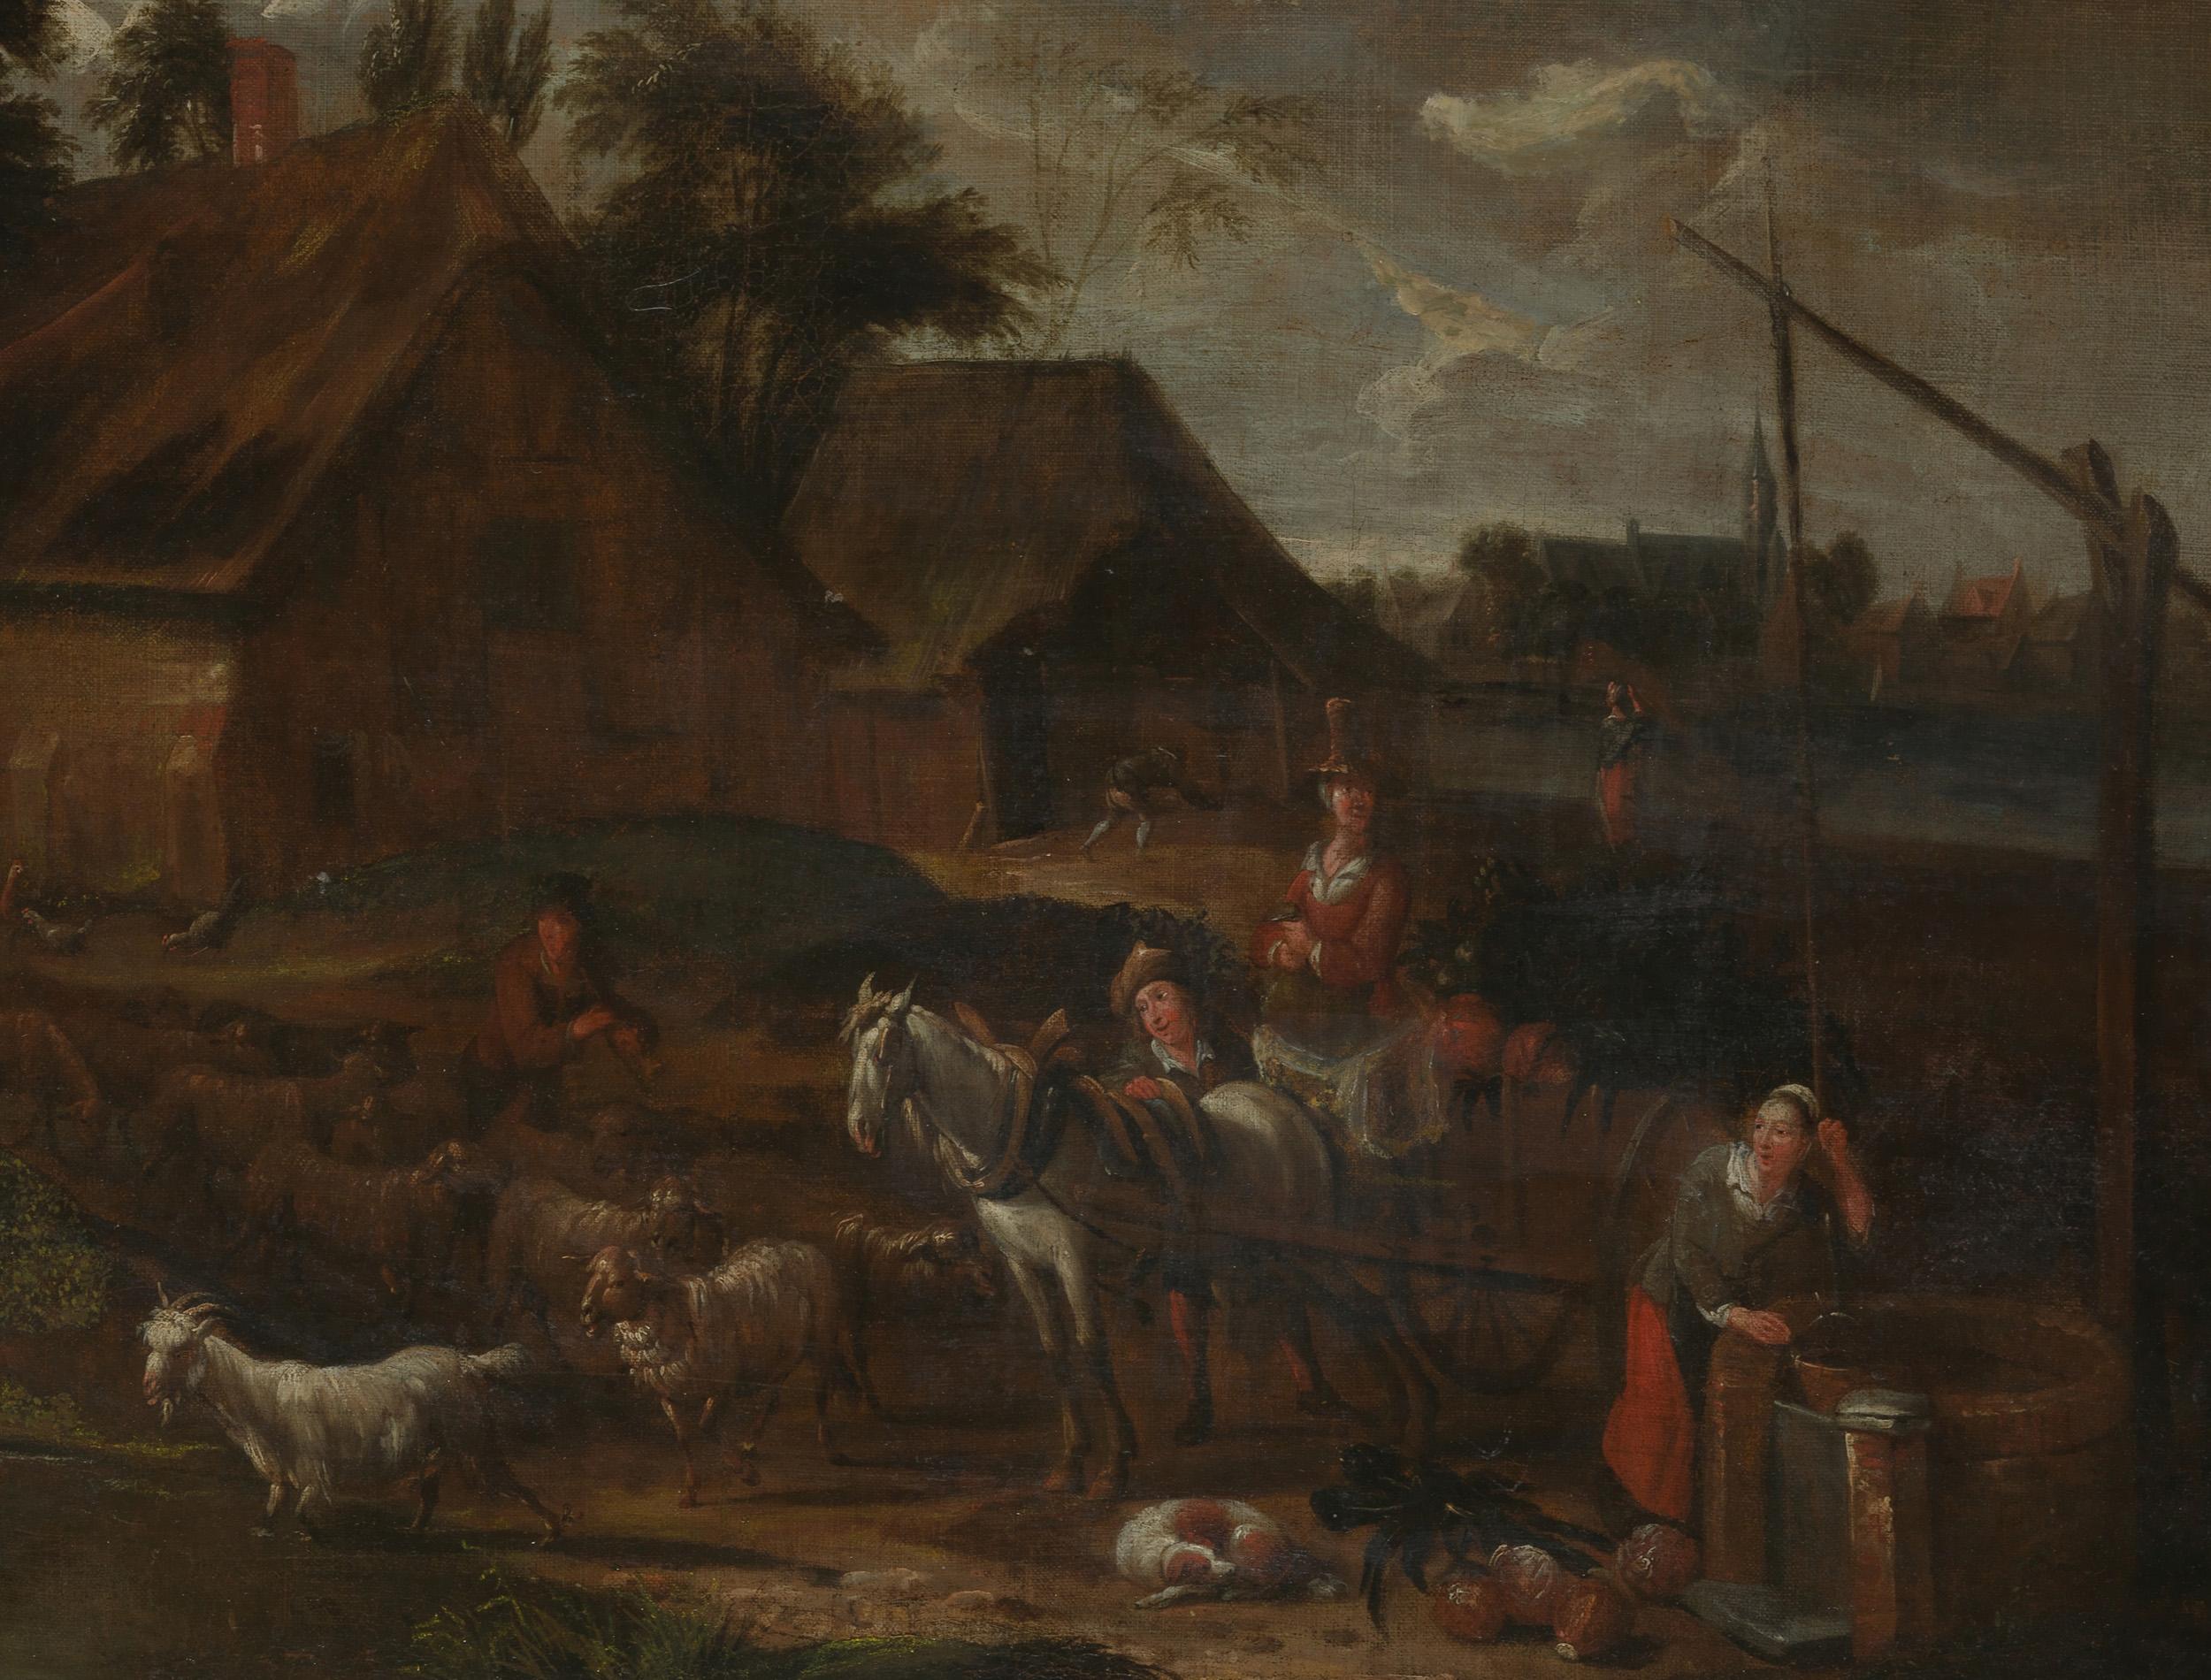 Farmyard with Well, People and Livestock, Oil on Canvas - Painting by David Teniers the Younger